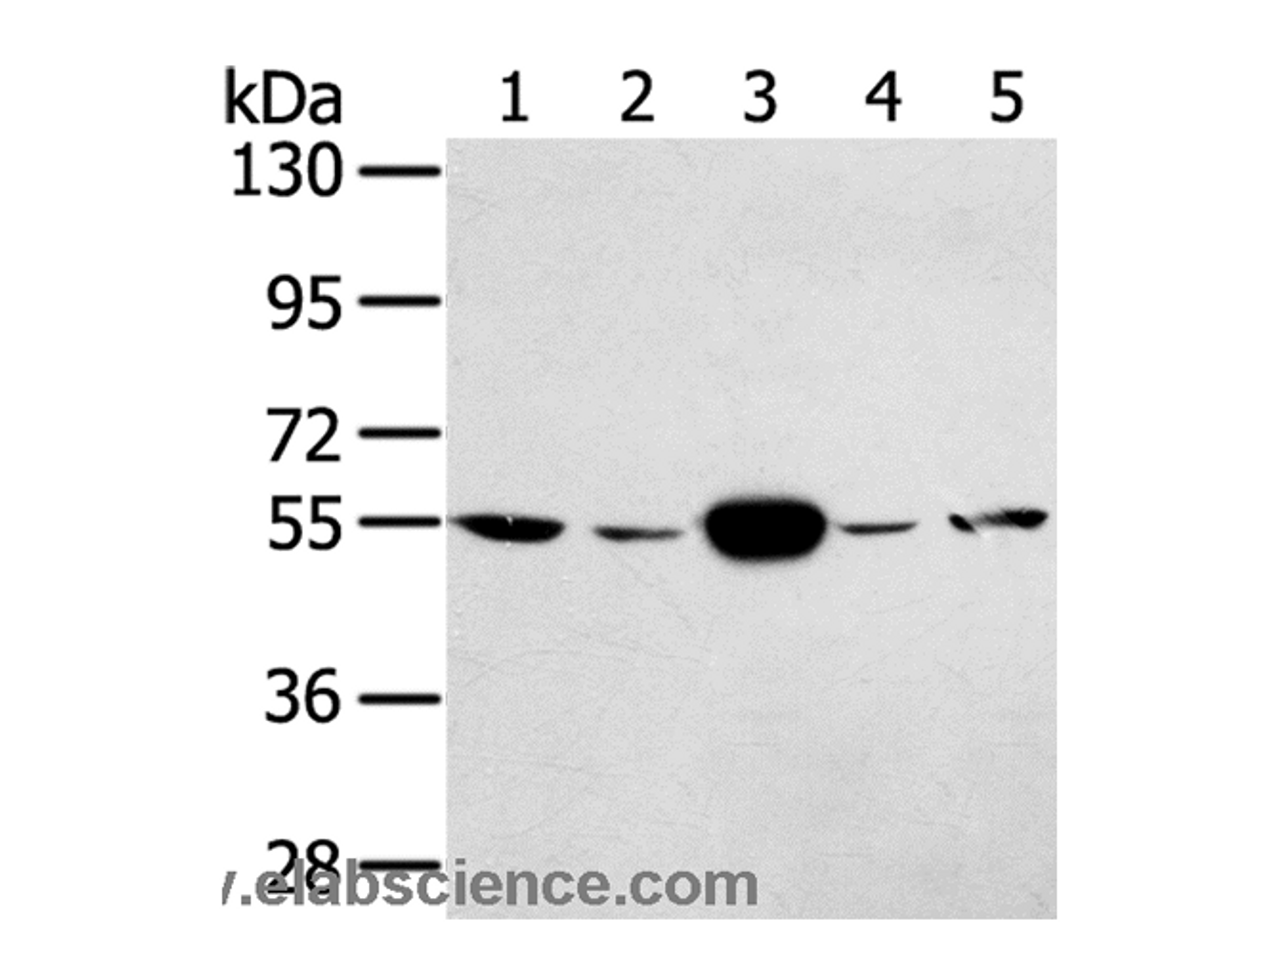 Western Blot analysis of Hela and K562 cell, Human fetal muscle tissue, A375 and hepg2 cell using TRIM35 Polyclonal Antibody at dilution of 1:400